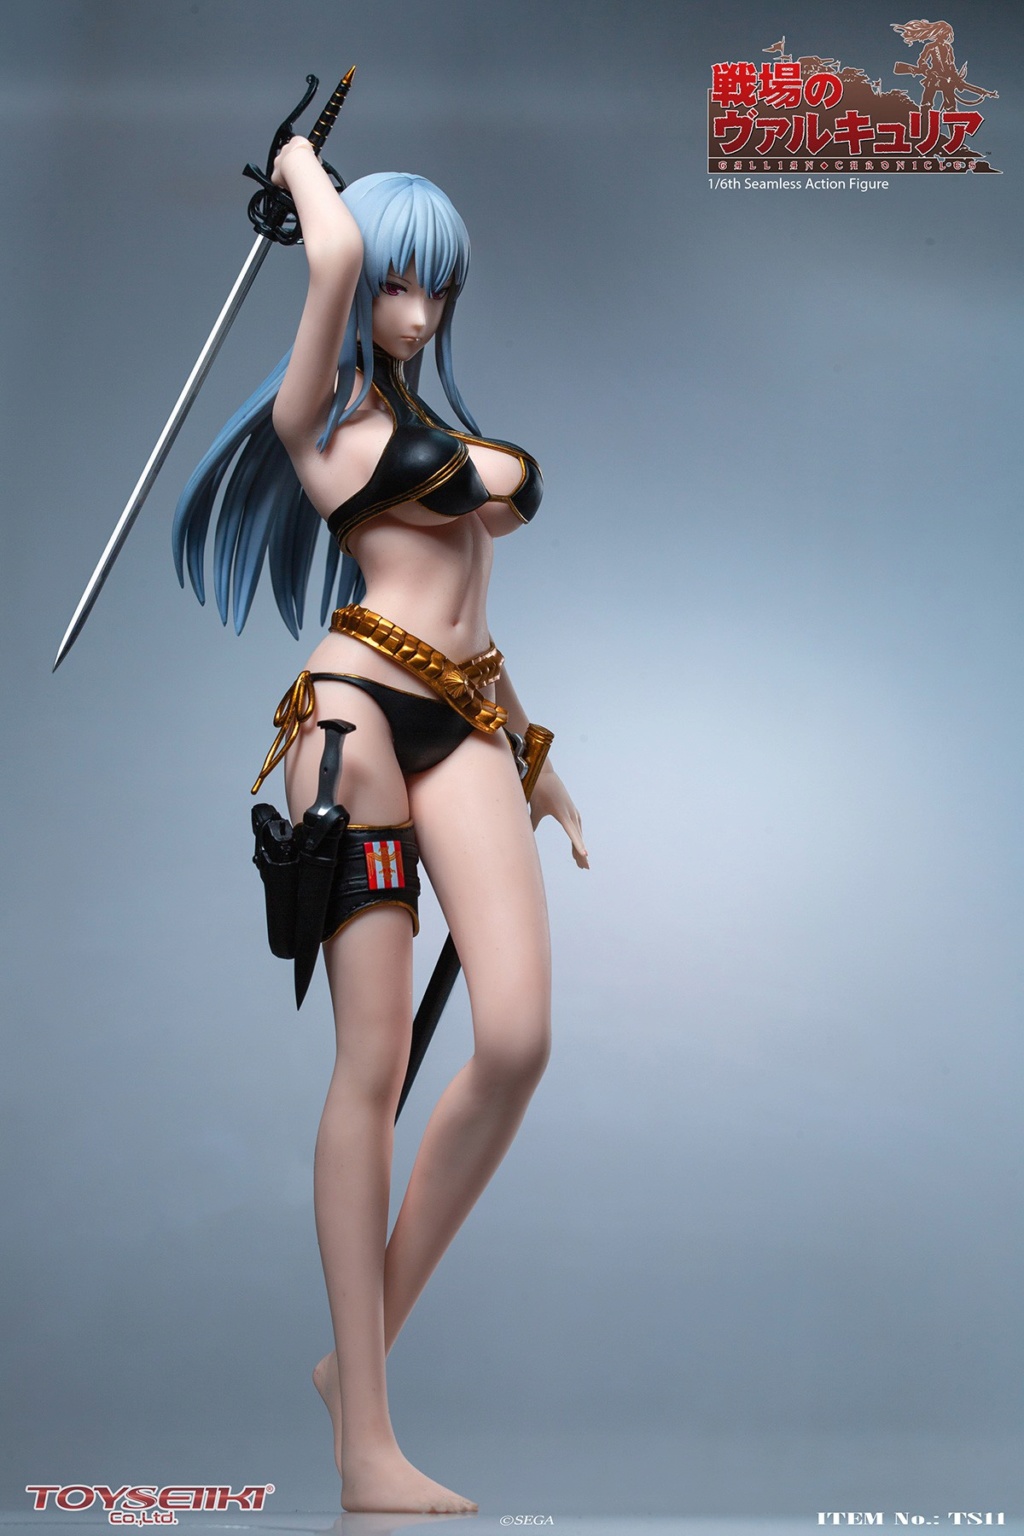 female - NEW PRODUCT: TOYSEIIKI: 1/6 "The Valkyrie of the Battlefield"- Selvaria Bles Action Figure (# TS11) 12000210